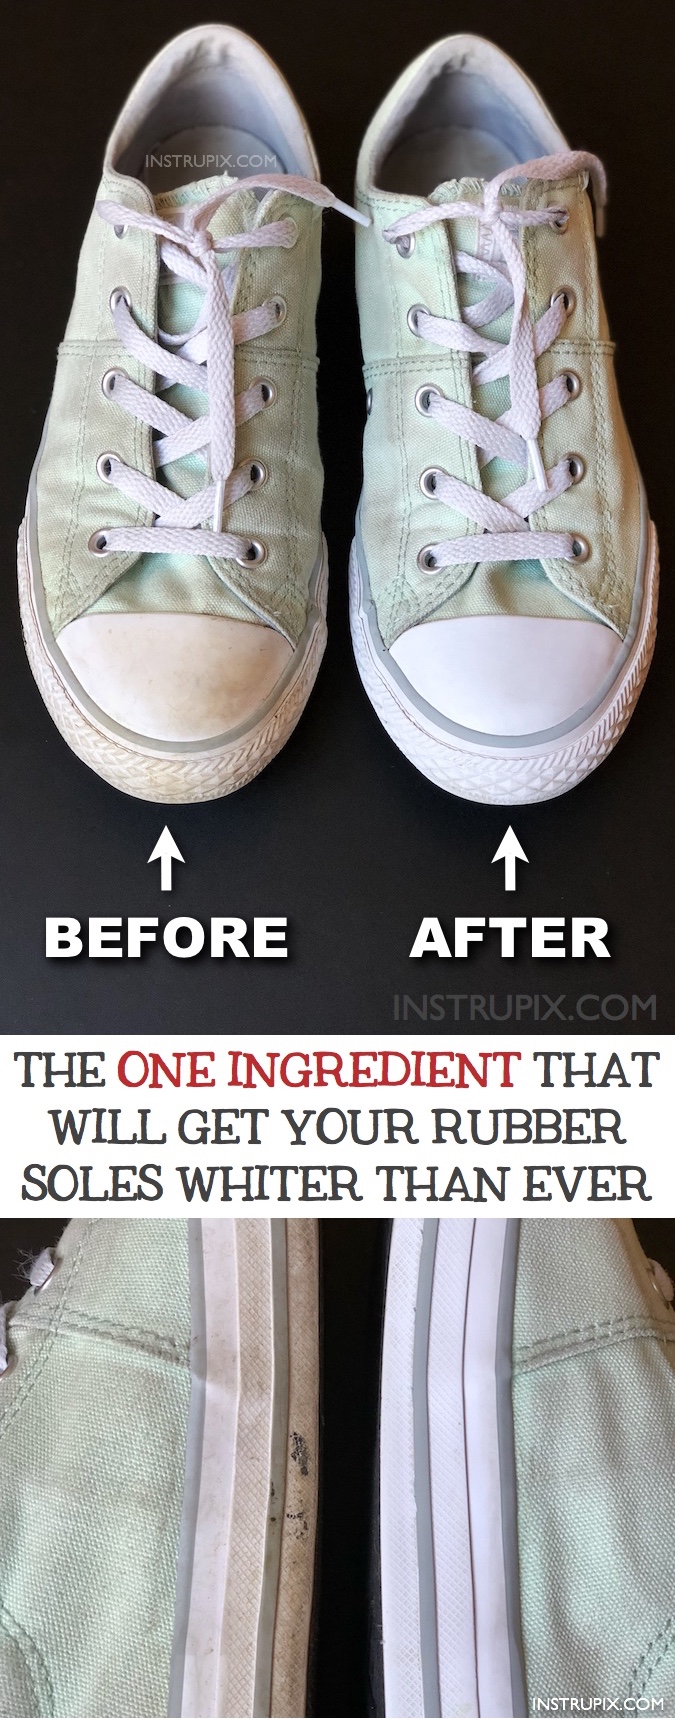 How To Clean White Rubber Soles How To Clean Converse Like Magic (or any rubber soles!)